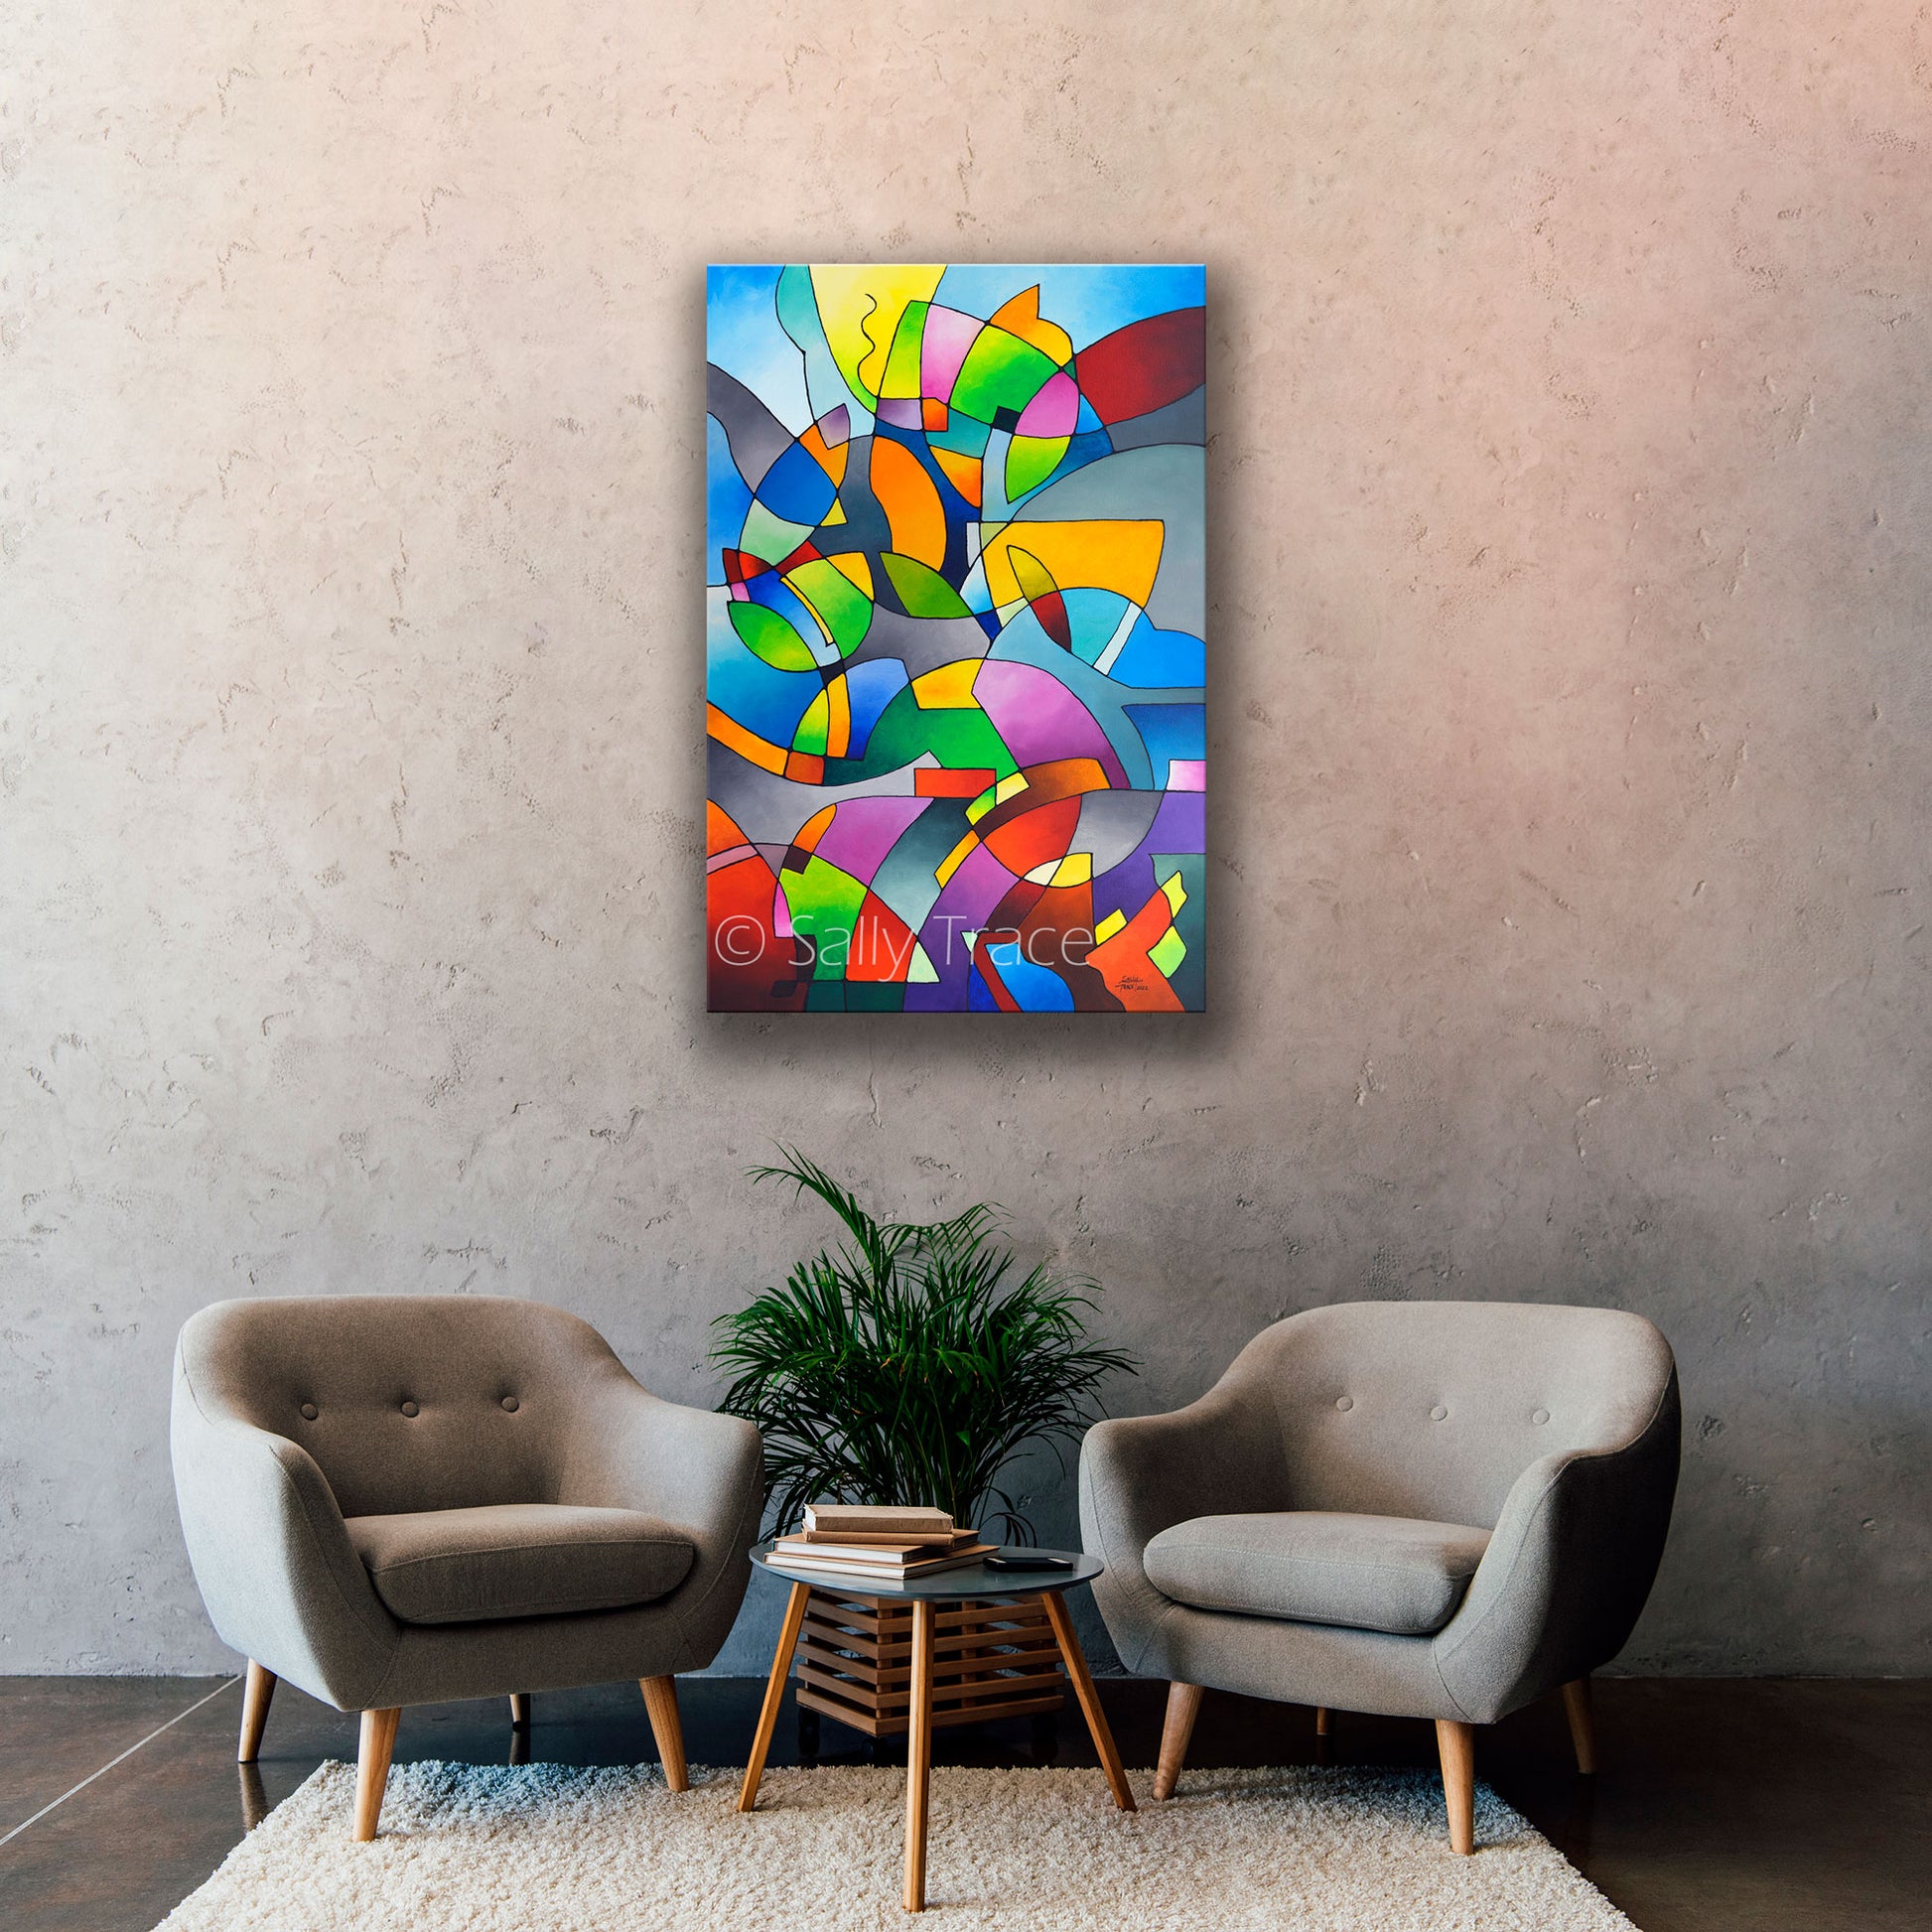 Modern geometric abstract art original acrylic painting on canvas "Information Paradox" by Sally Trace, room view